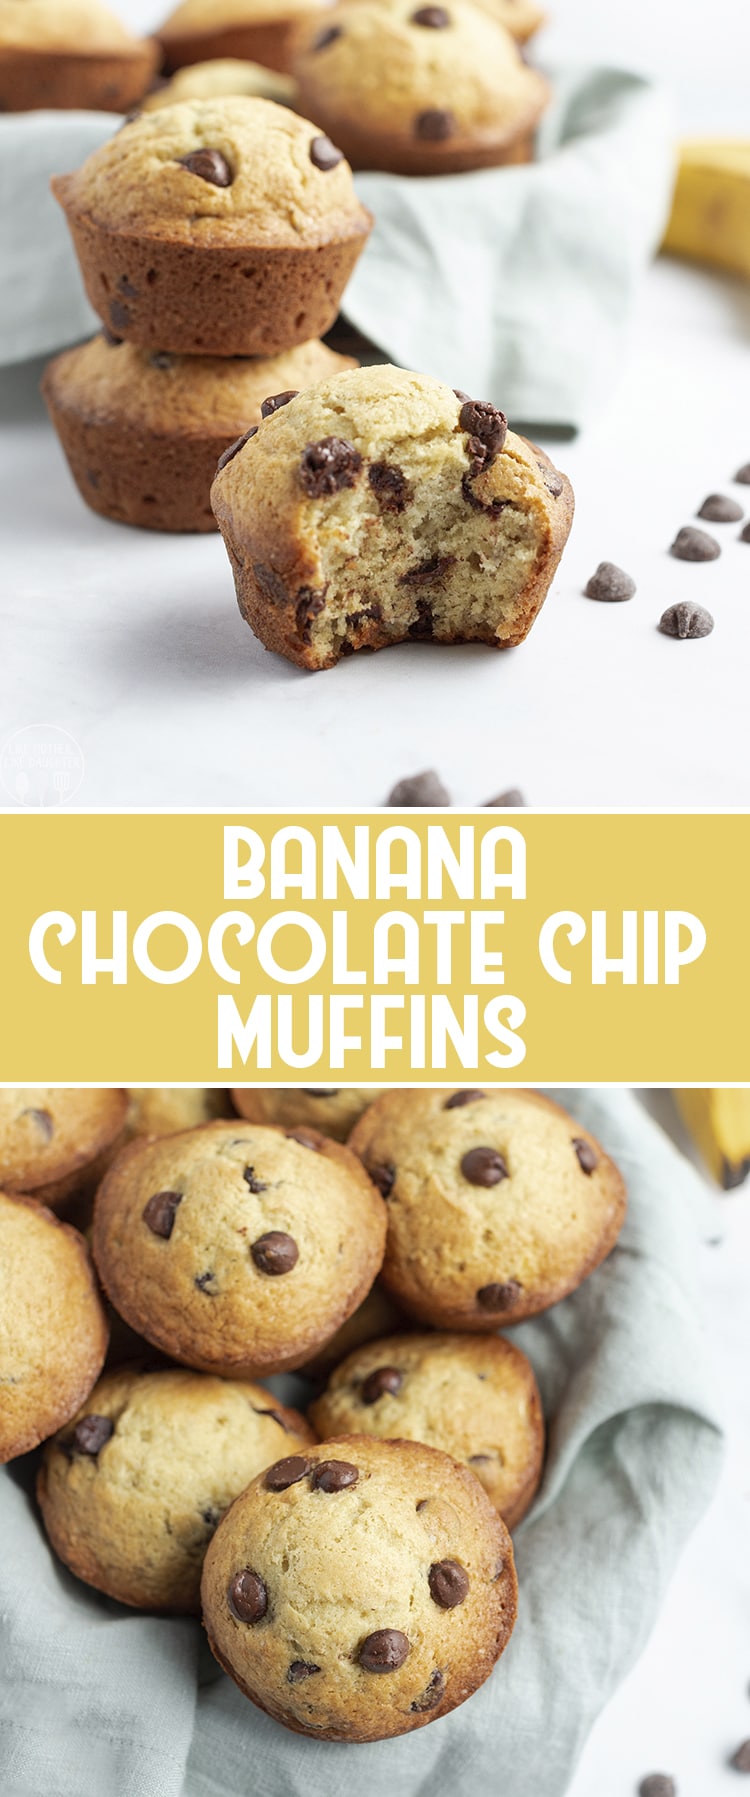 These banana chocolate chip muffins are a sweet and moist banana muffin, packed full of chocolate chips. They're perfect for breakfast, or a snack!